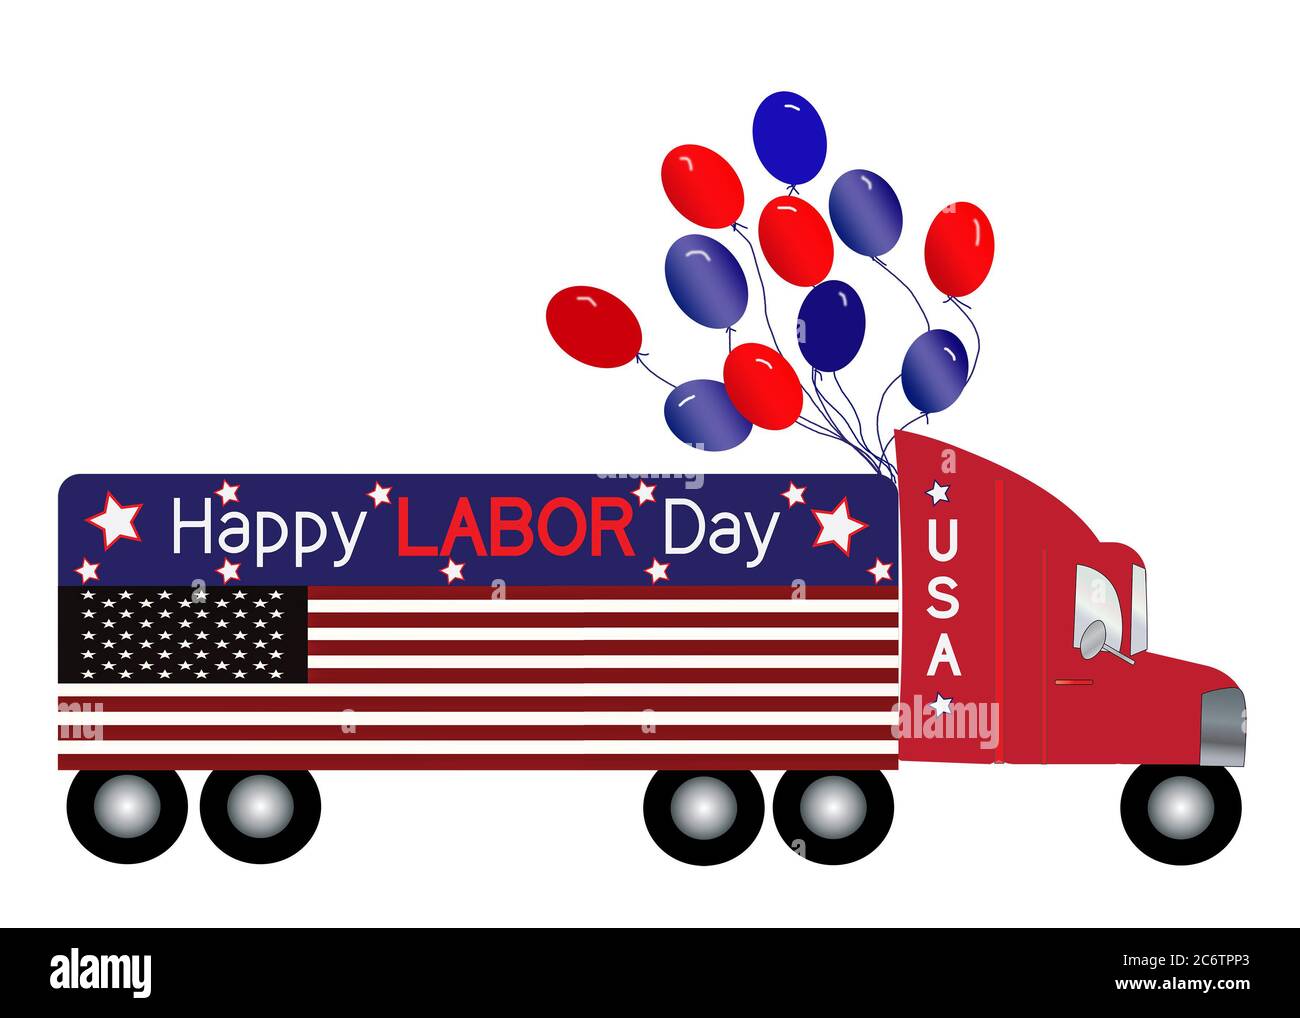 American holiday, Labor Day, graphic illustration of a large semi-truck decorated patriotically with the American Flag the full length of the truck Stock Photo